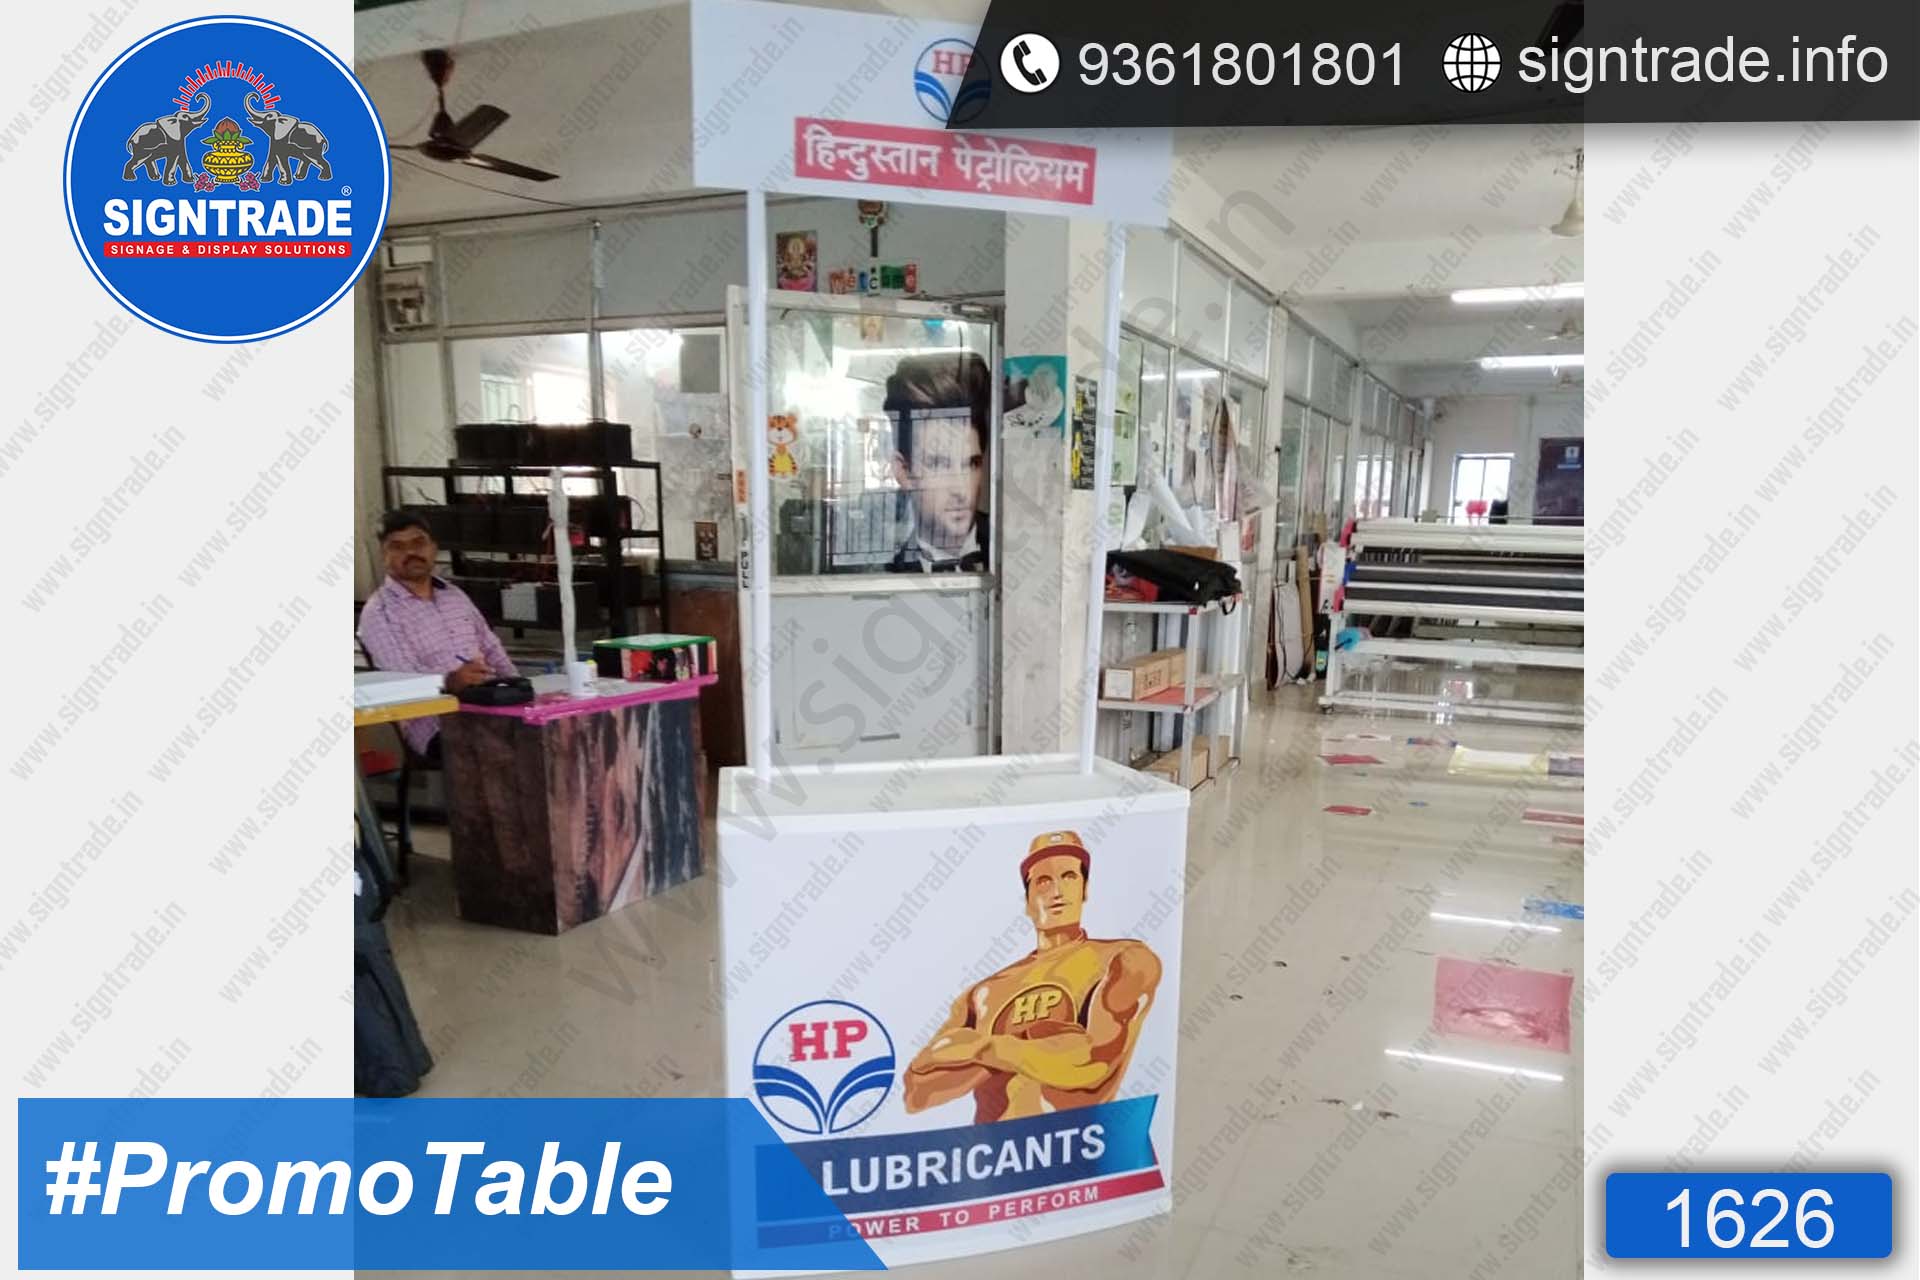 HP Lubricants - SIGNTRADE - Promotional Table Manufactures in Chennai